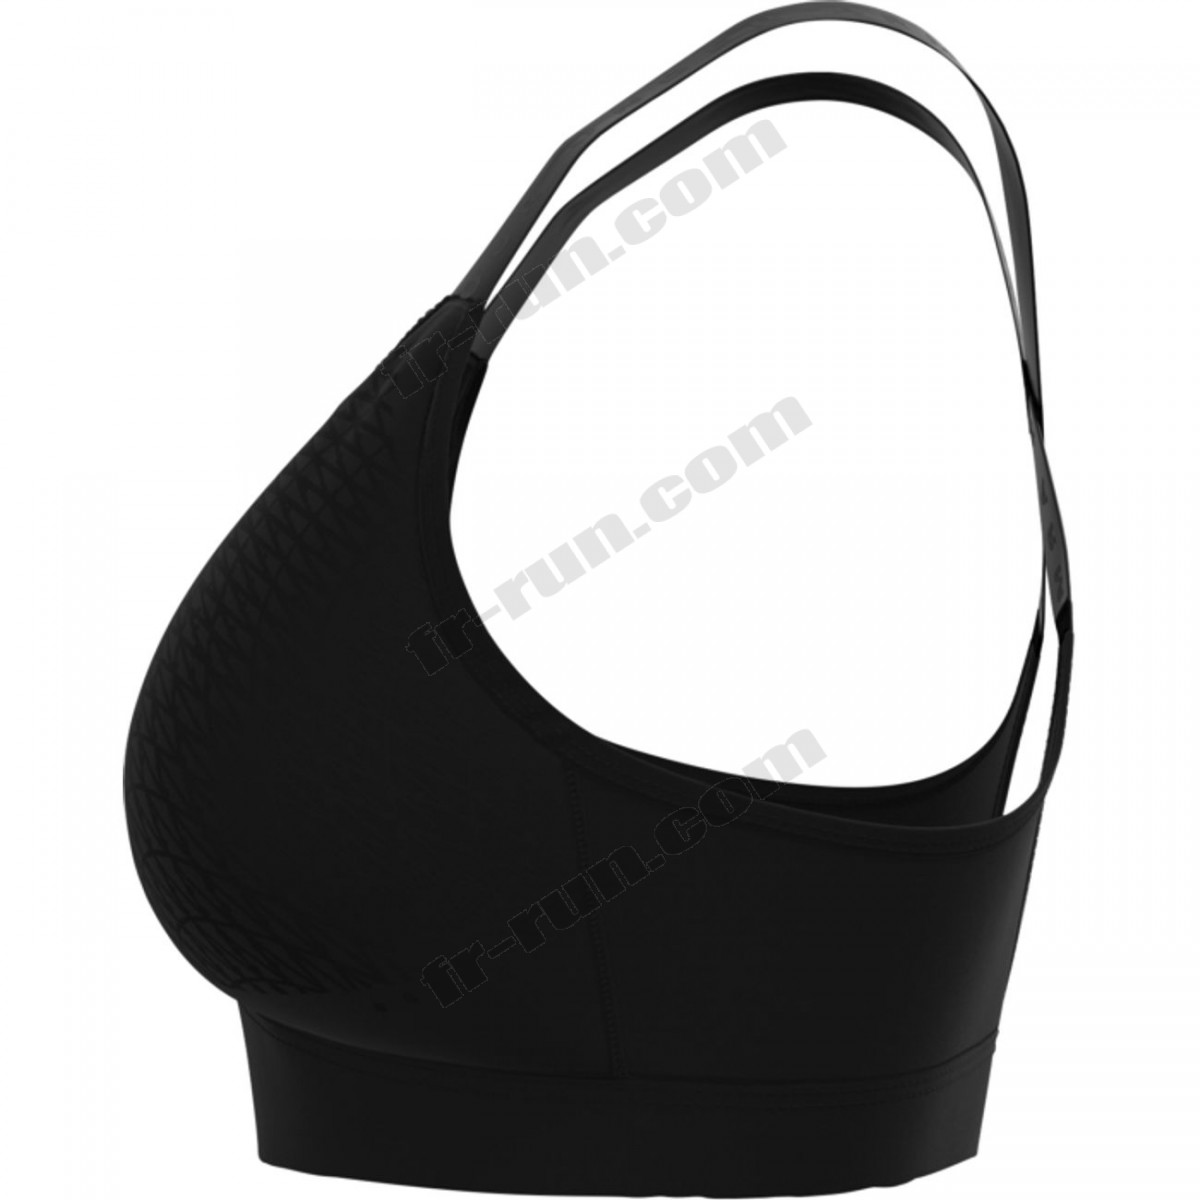 Under Armour/BRASSIERE Multisport femme UNDER ARMOUR INFINITY COVERED MID ◇◇◇ Pas Cher Du Tout - -0